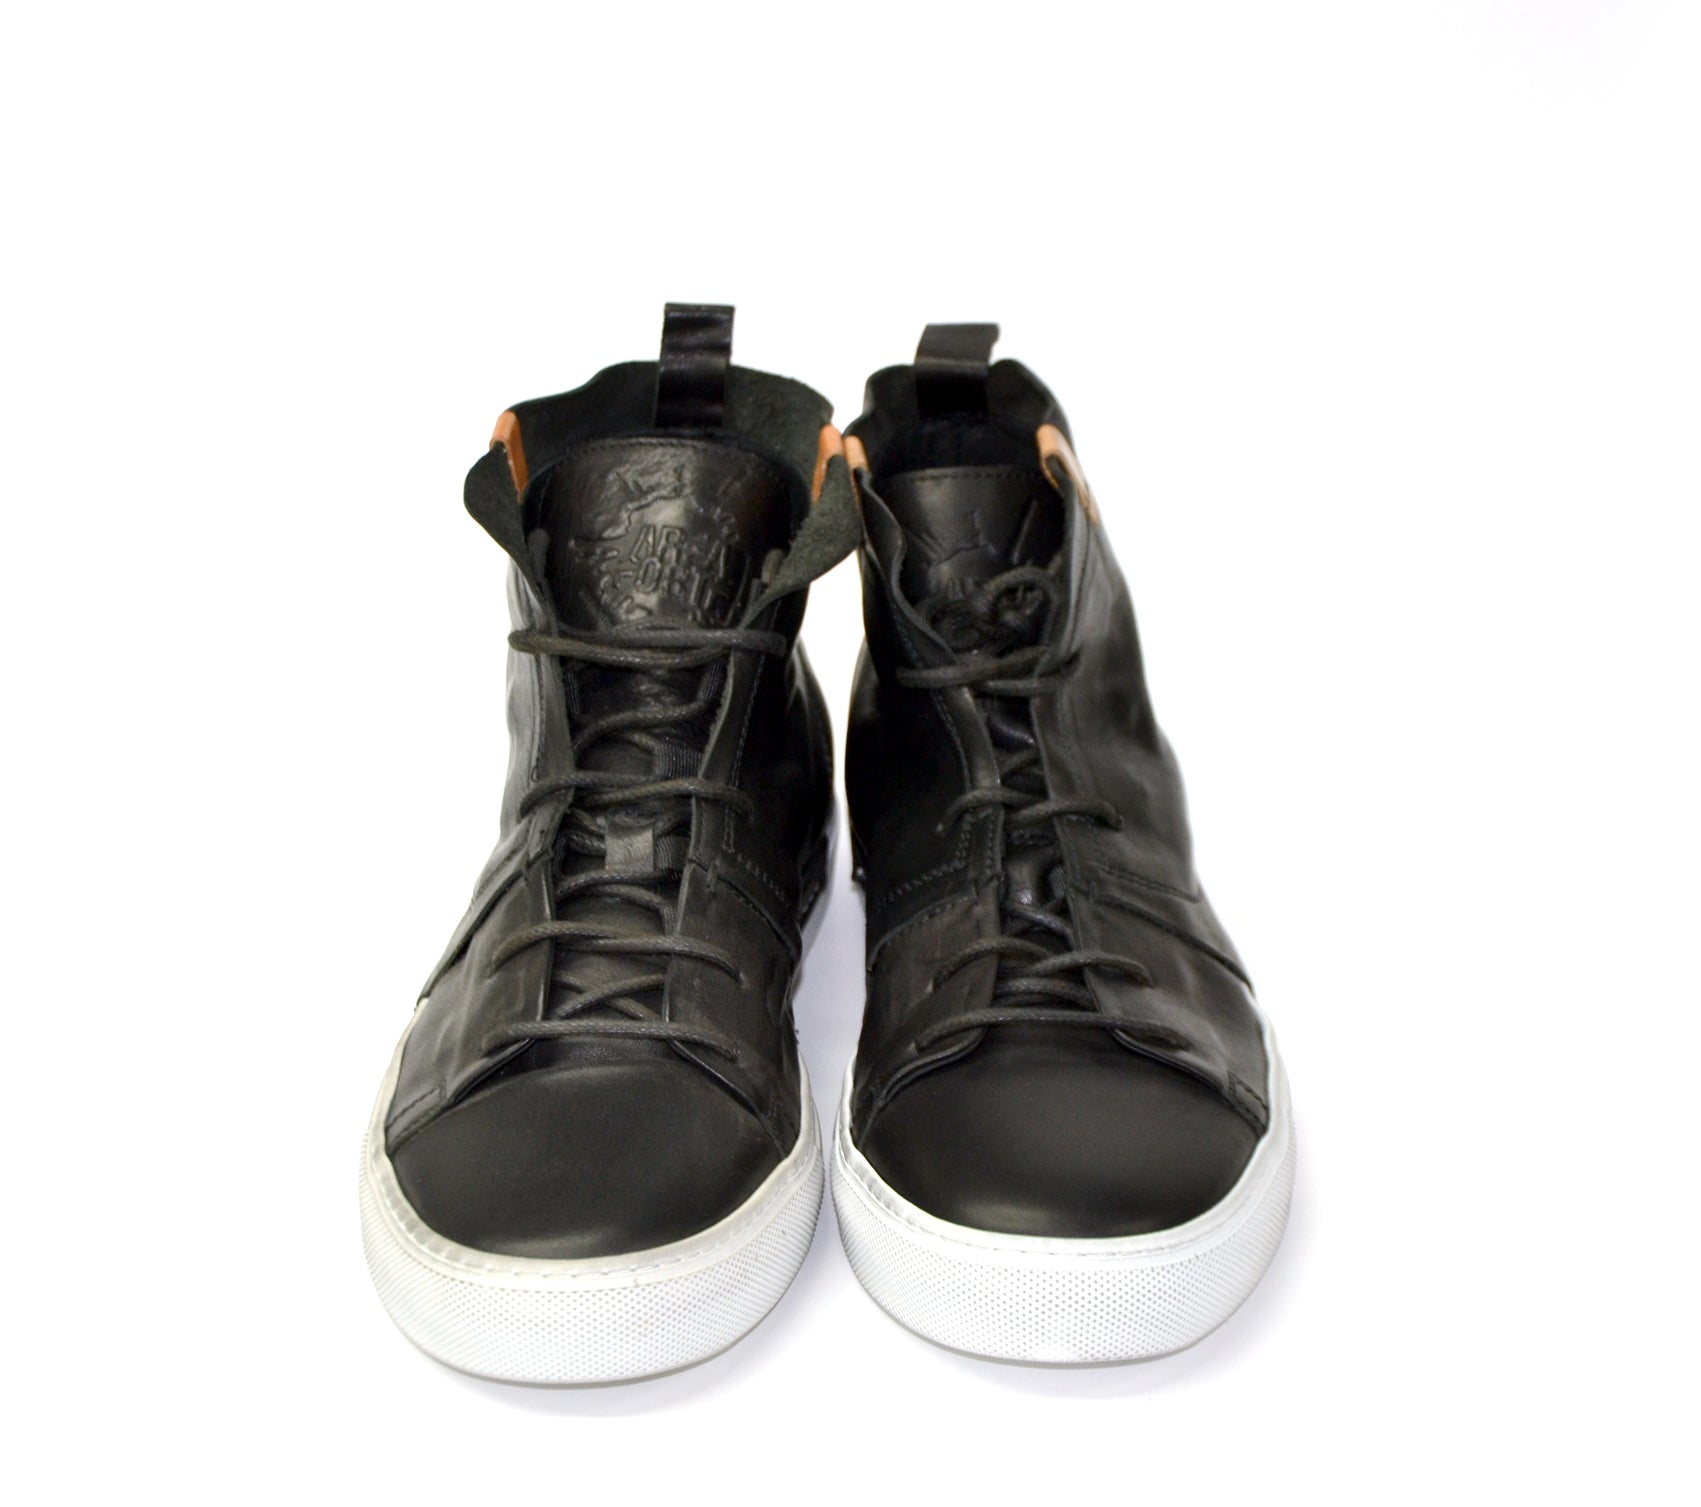 ALEX Black Laced Sneakers